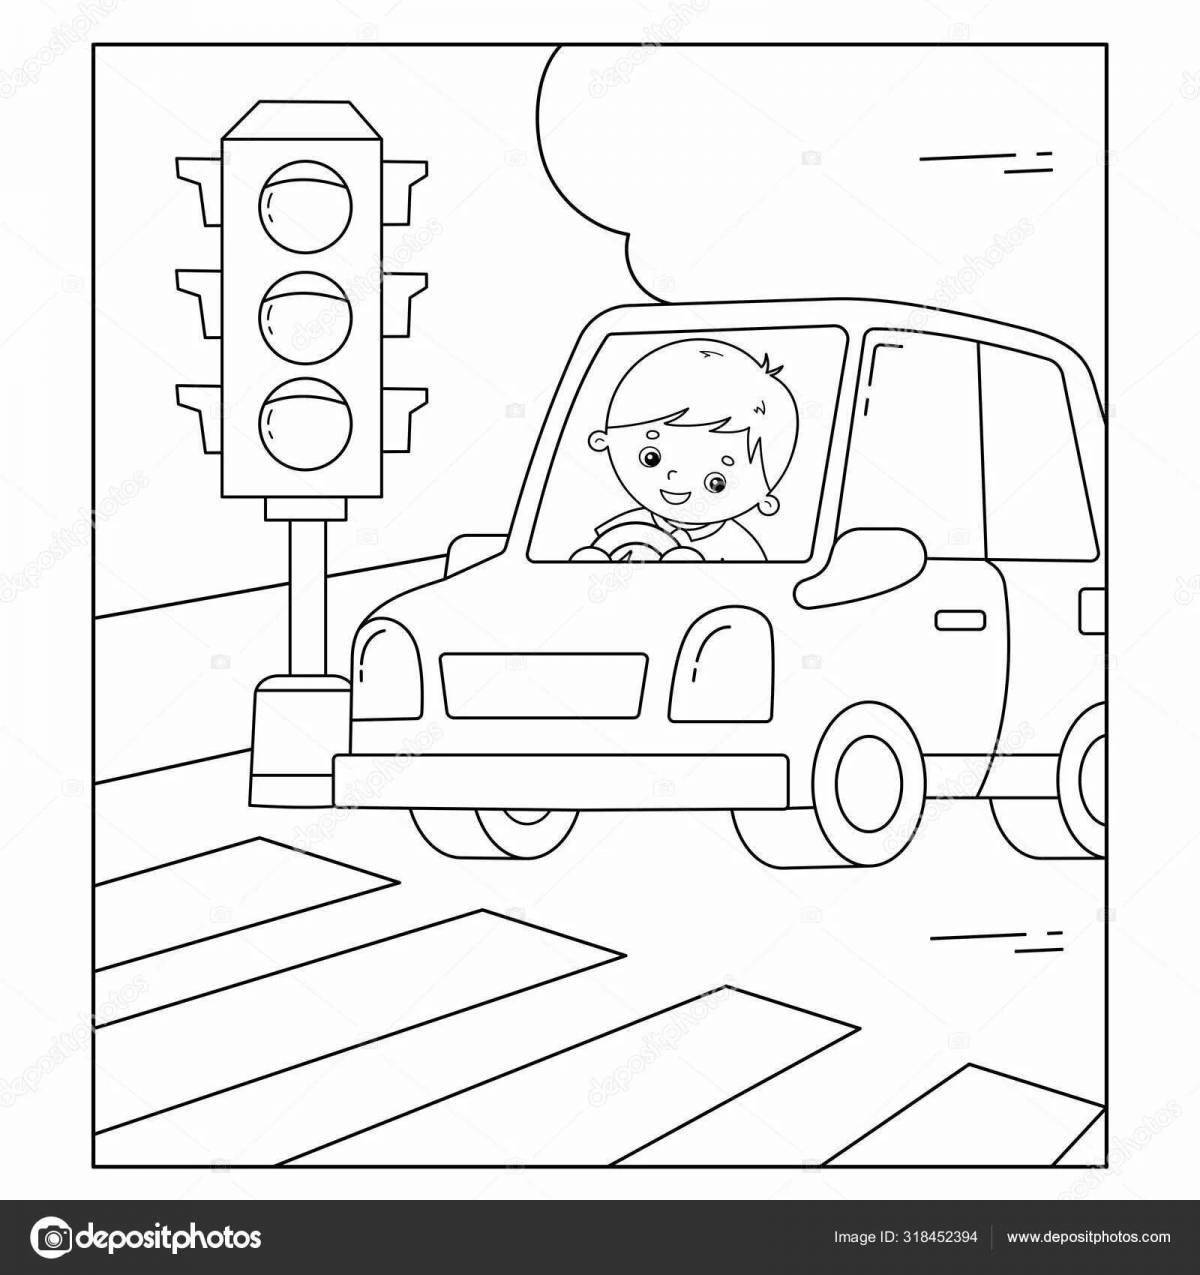 Bright rules of the road pre-k coloring book